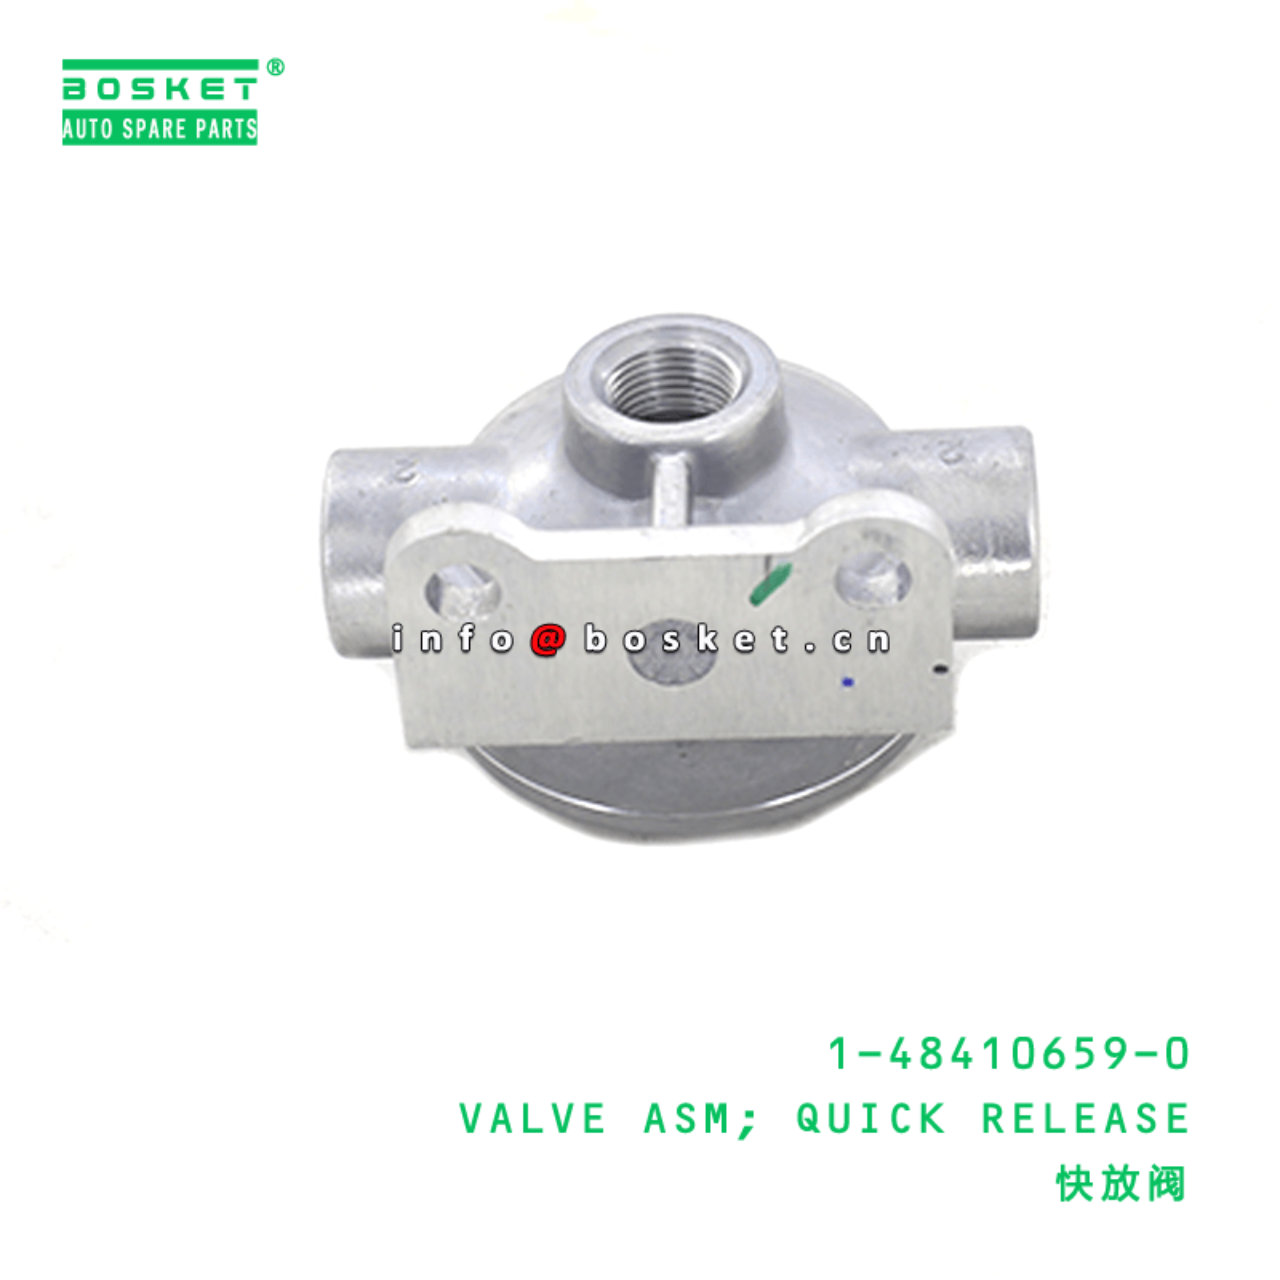  1-48410659-0 Quick Release Valve Assembly 1484106590 Suitable for ISUZU FVR34 6HK1